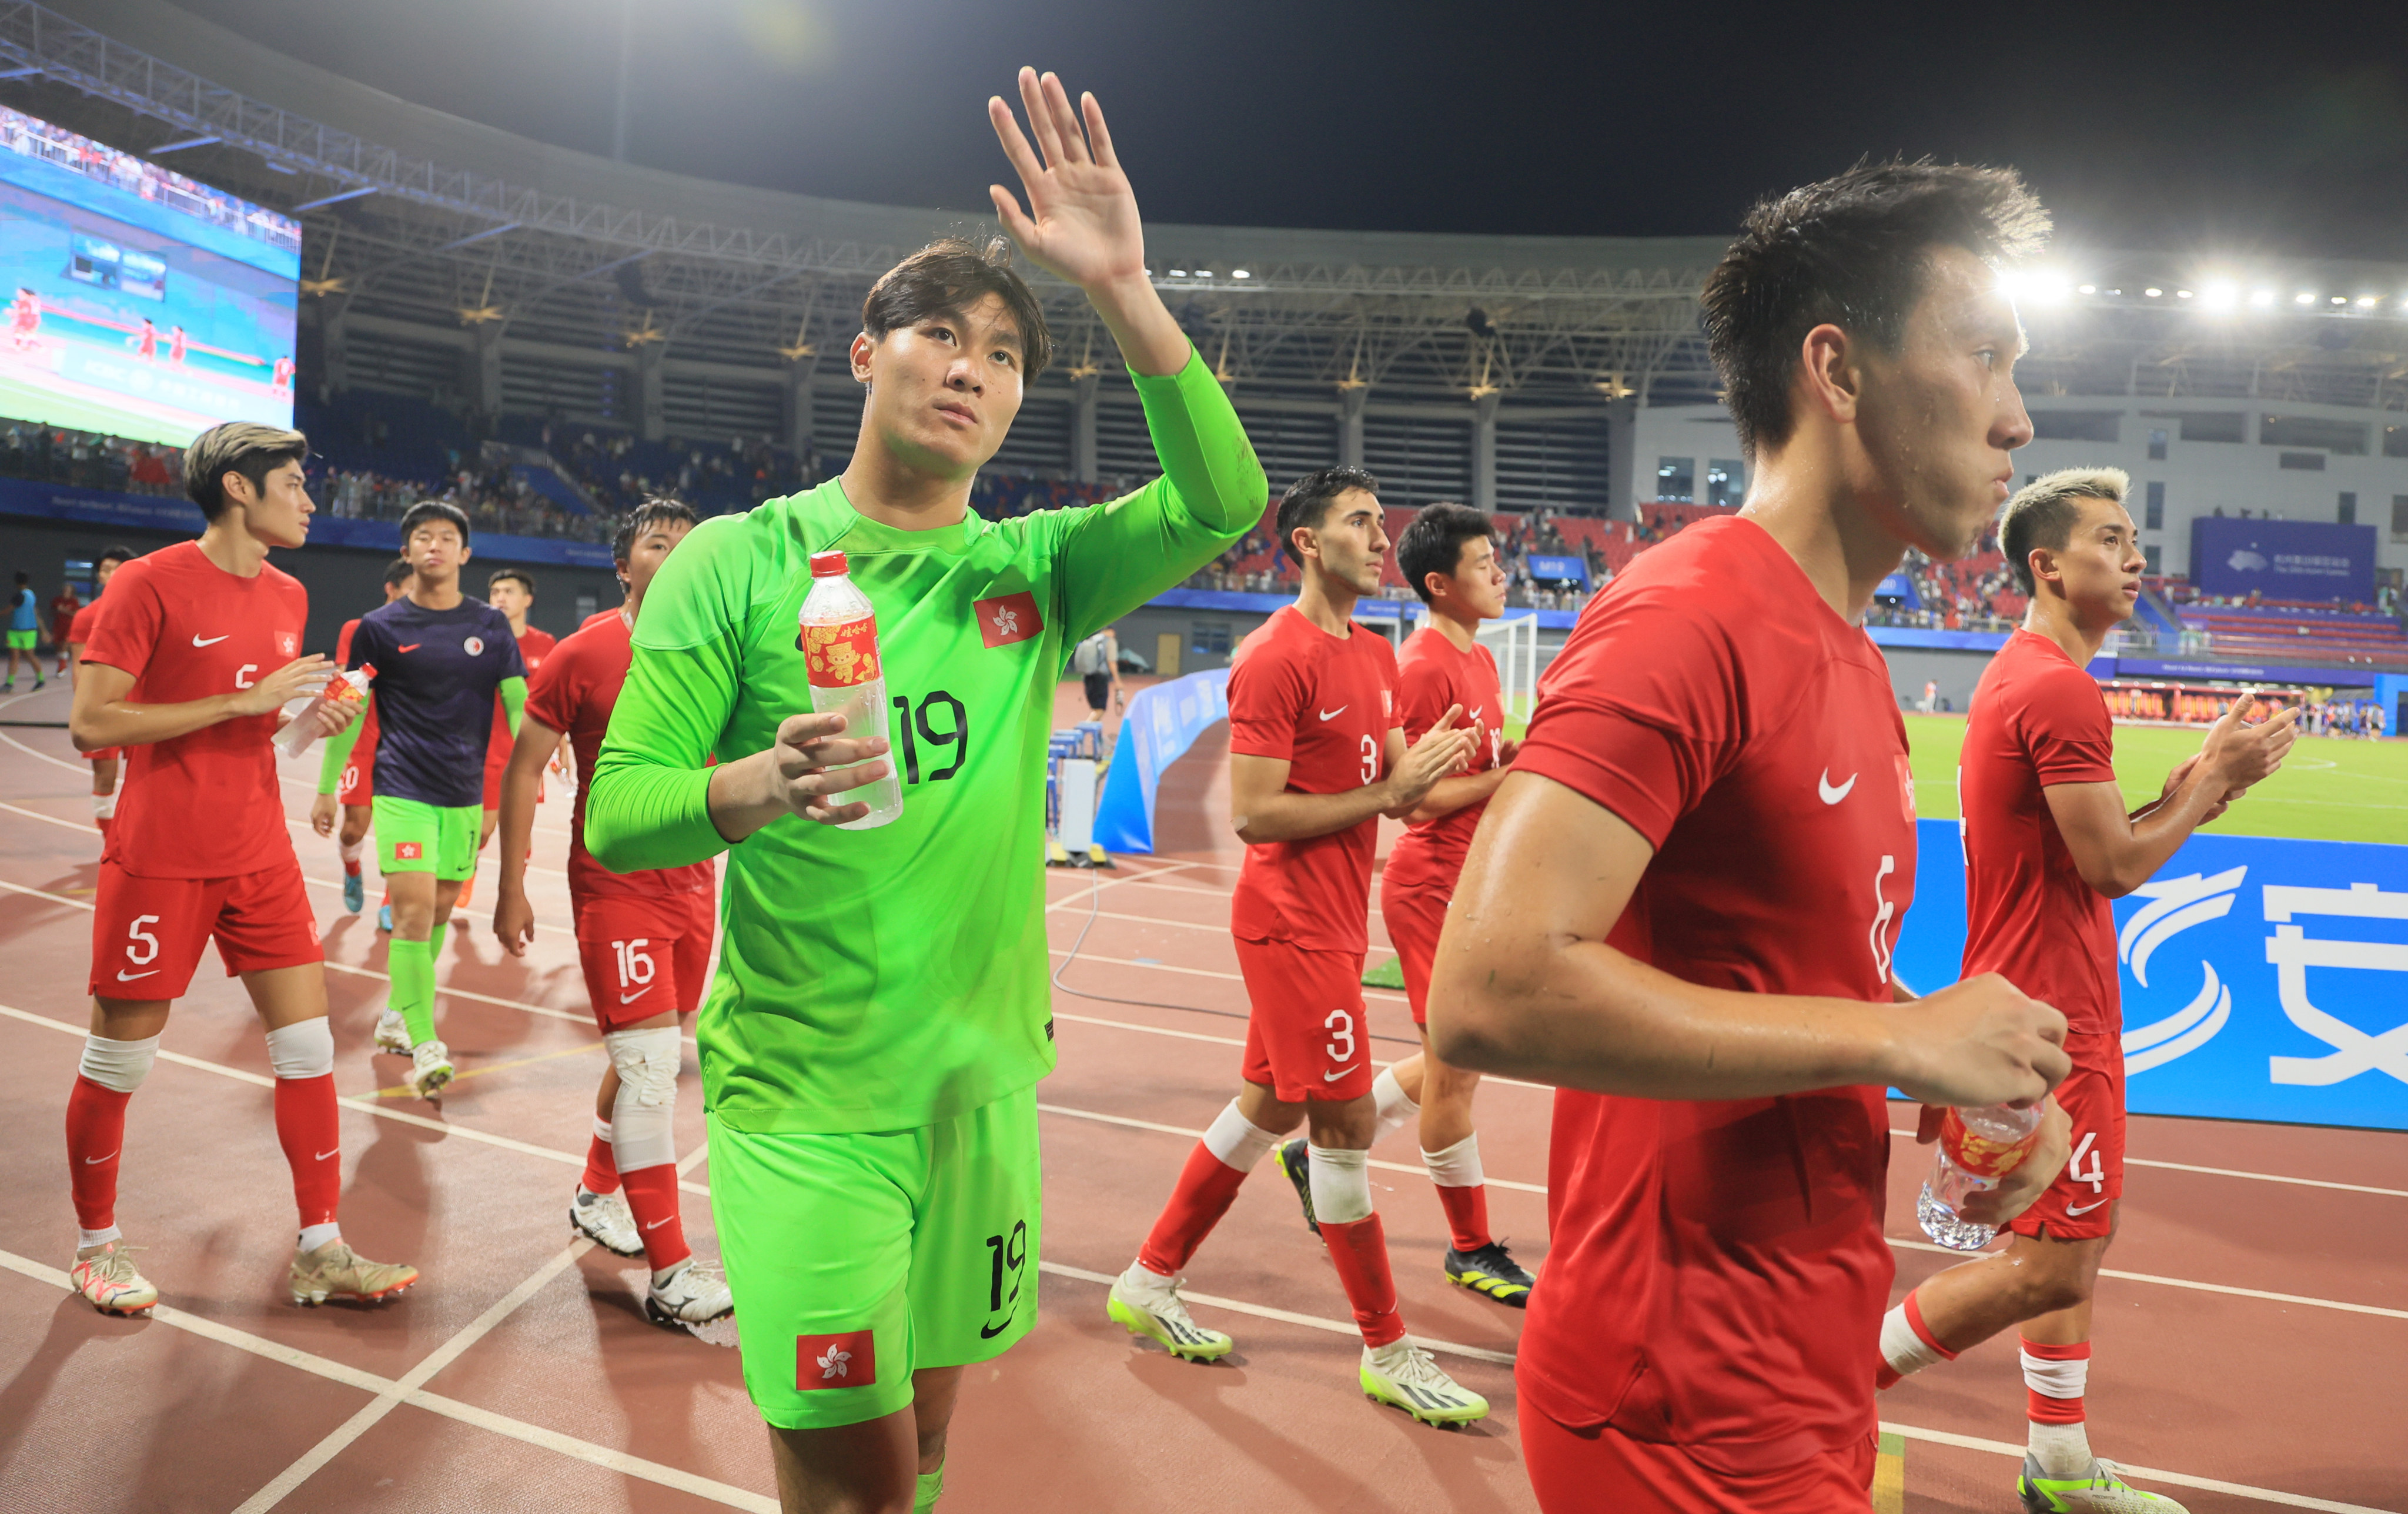 Hong Kong’s players are applauded at Xiaoshan Sports Centre Stadium after their semi-final loss. Photo: Dickson Lee